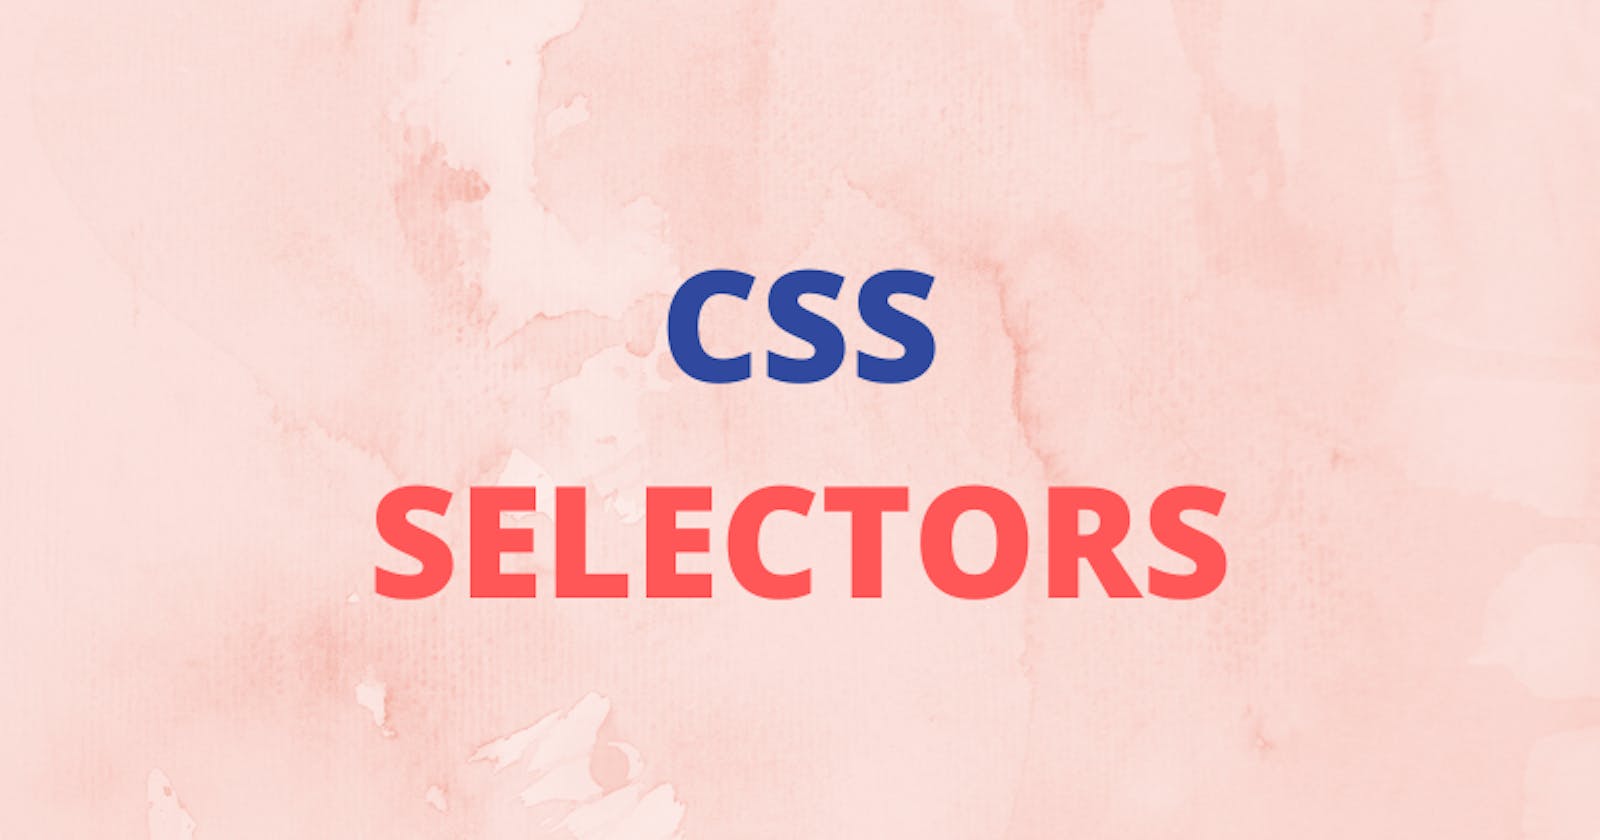 Select like a pro with CSS Selectors